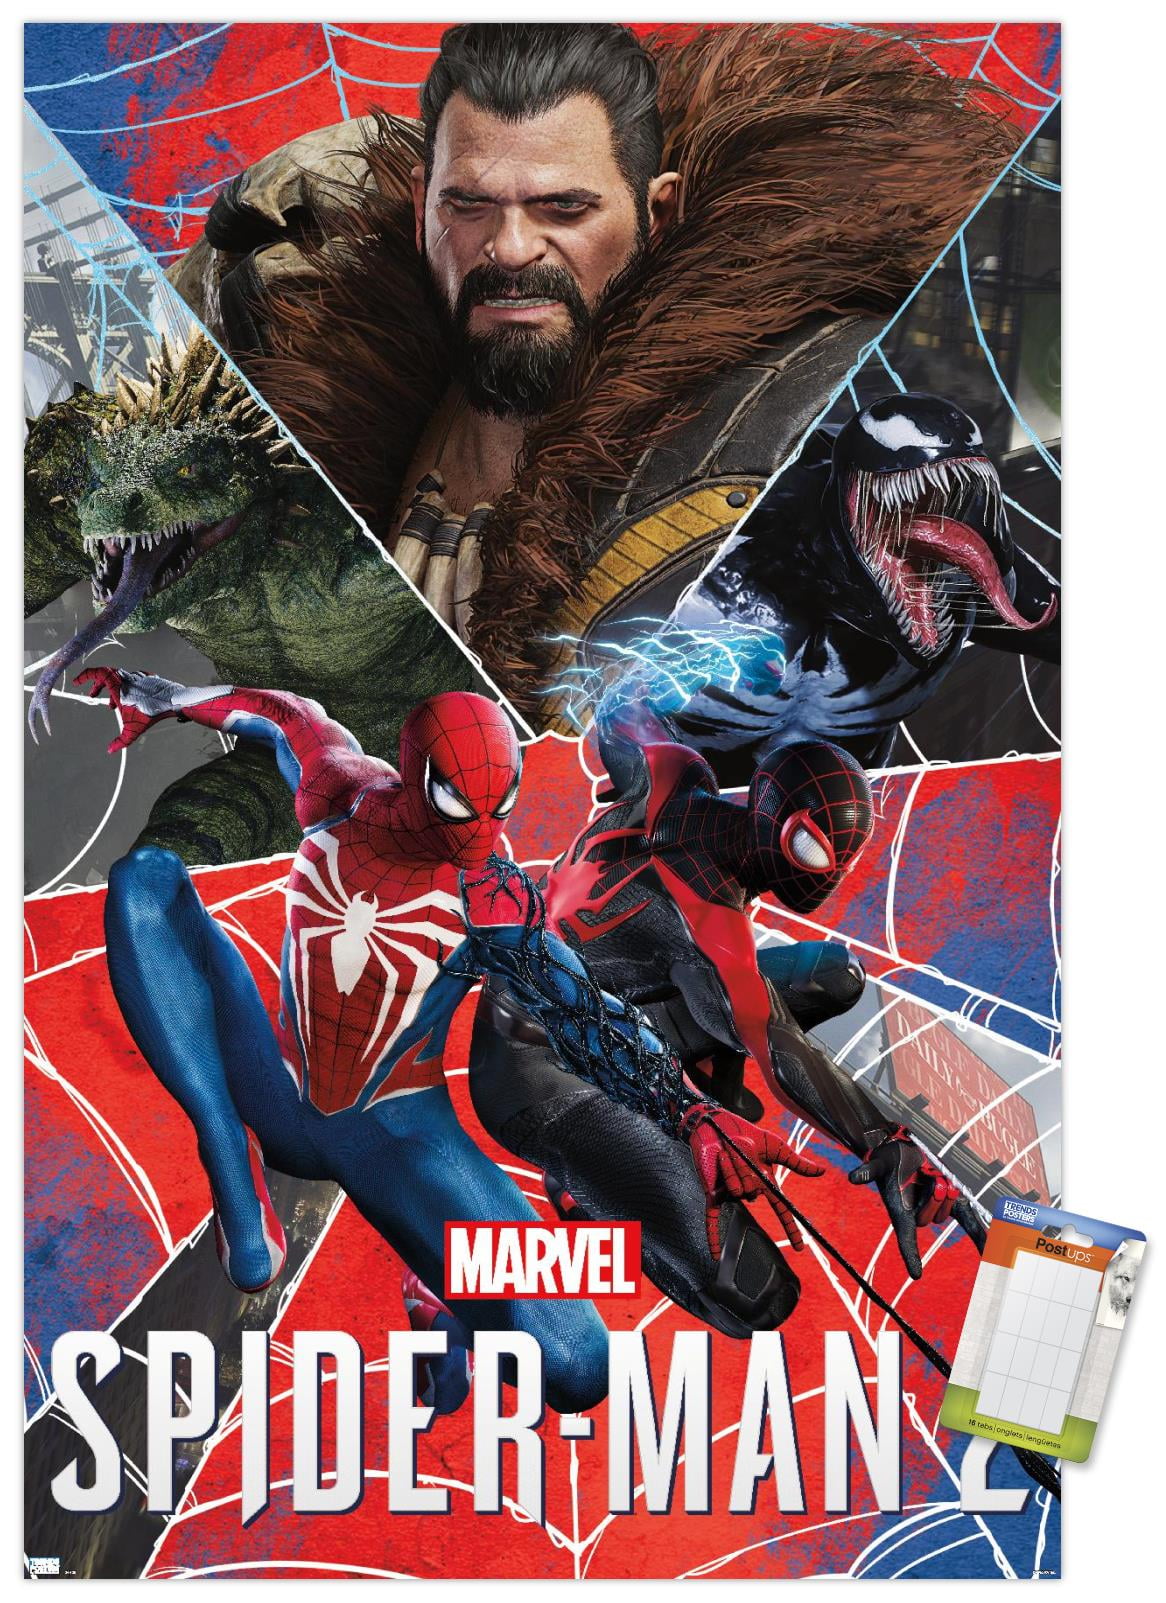 Marvel's Spider-Man 2 - Group Wall Poster, 14.725 x 22.375